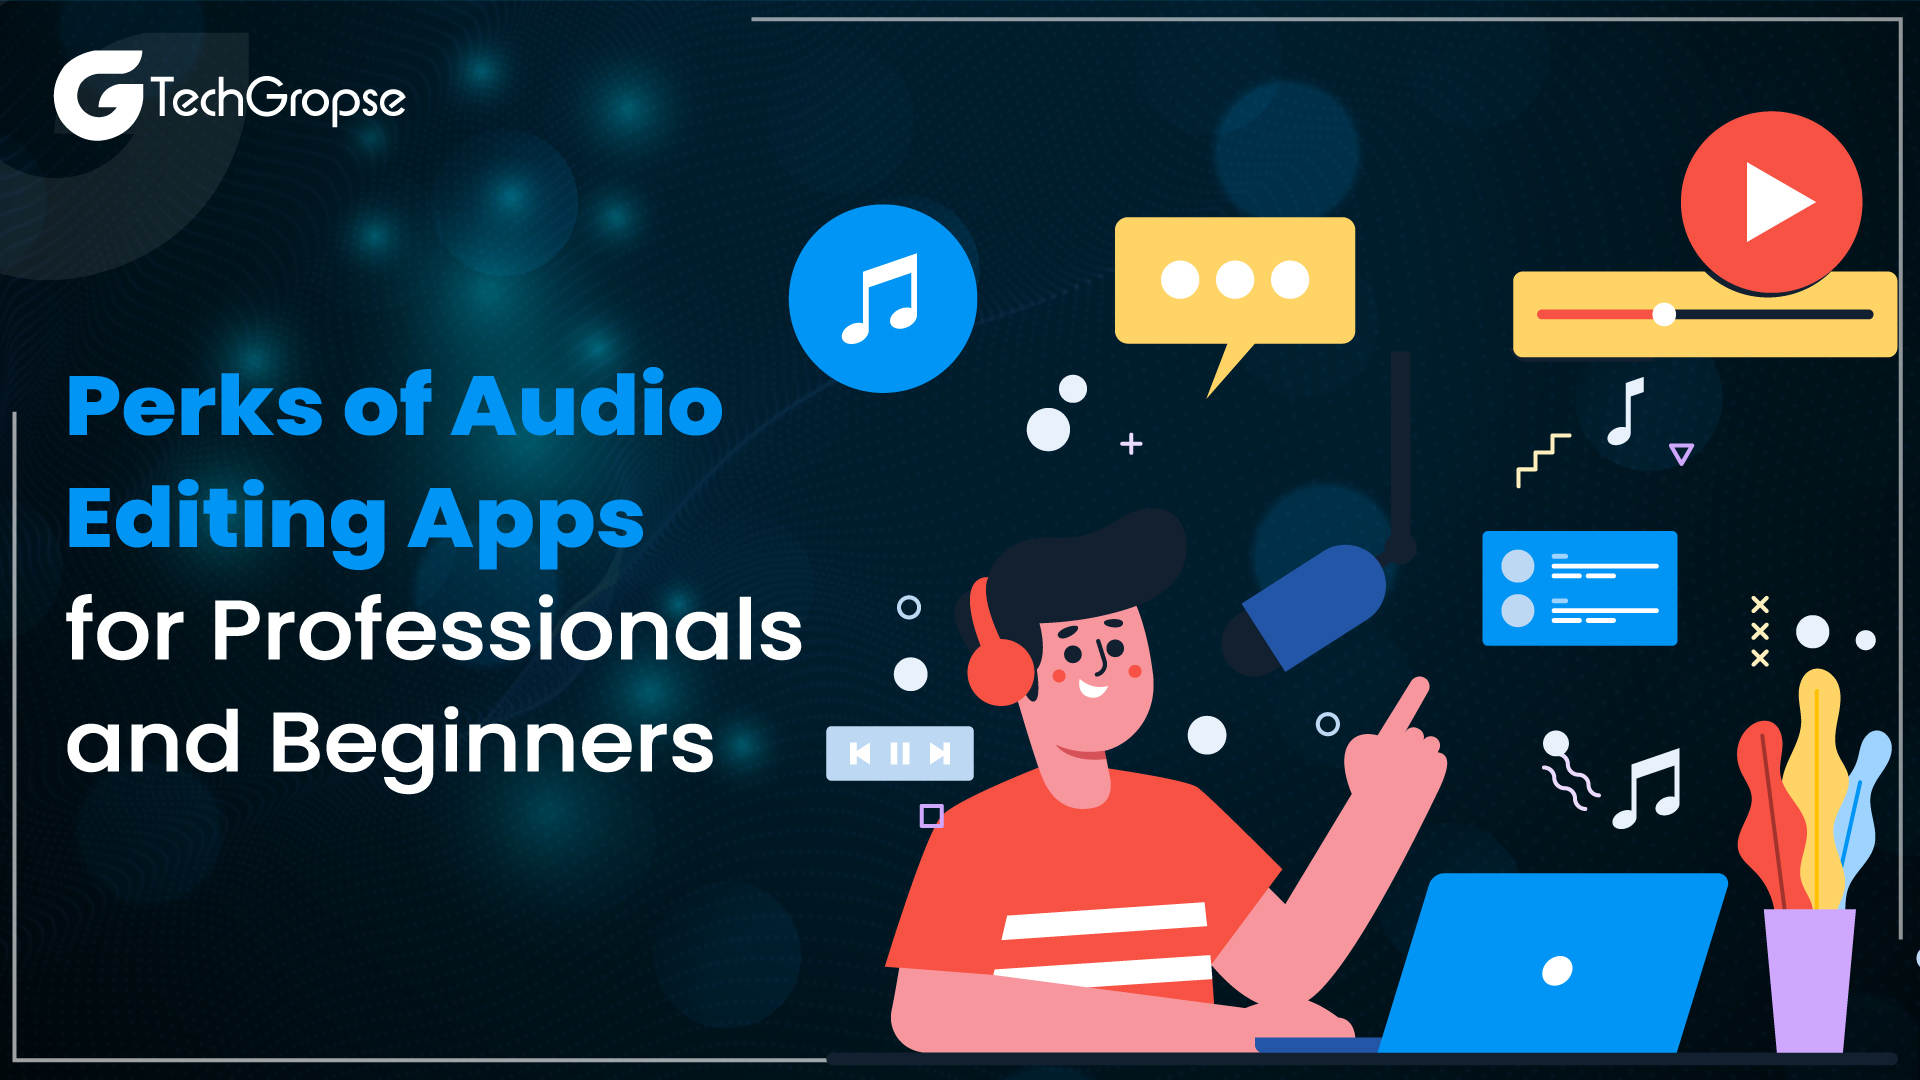 Perks of Audio Editing Apps for Professionals and Beginners